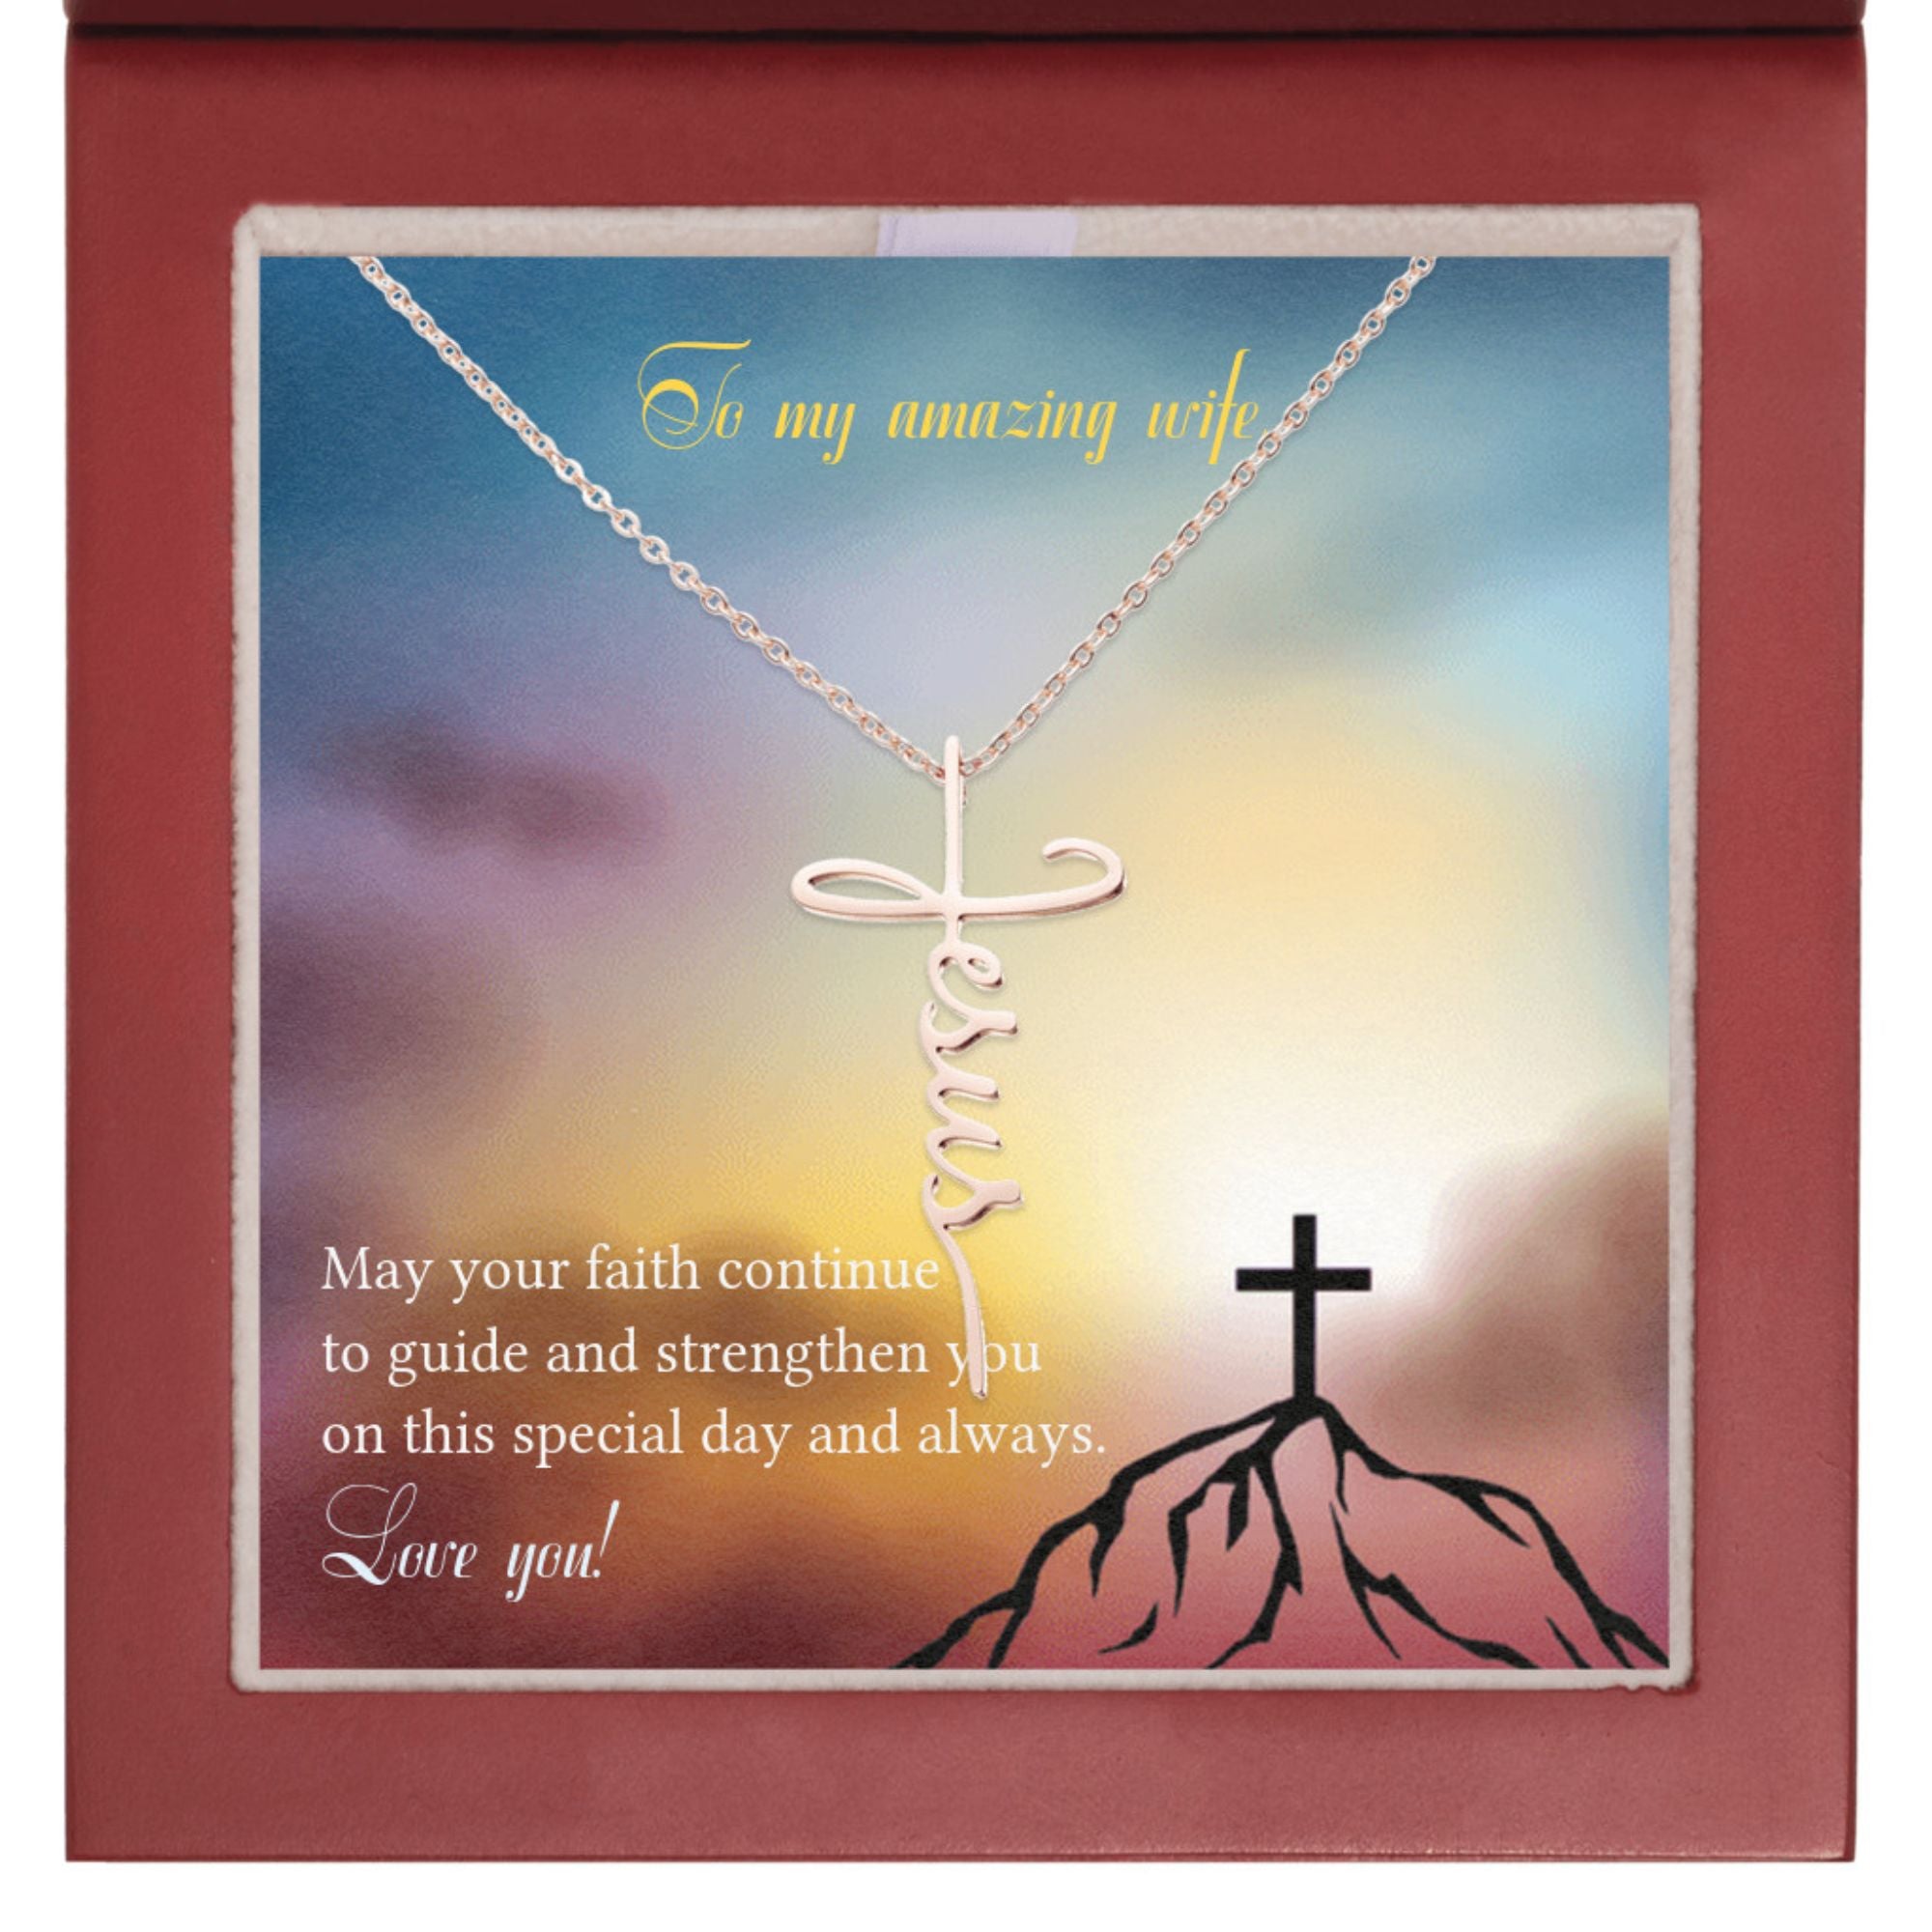 My Amazing Wife - I Am the Way - Jesus Cross Necklace Box Type: LED Box Finish: 18K Rose Gold Plated Jesus Passion Apparel